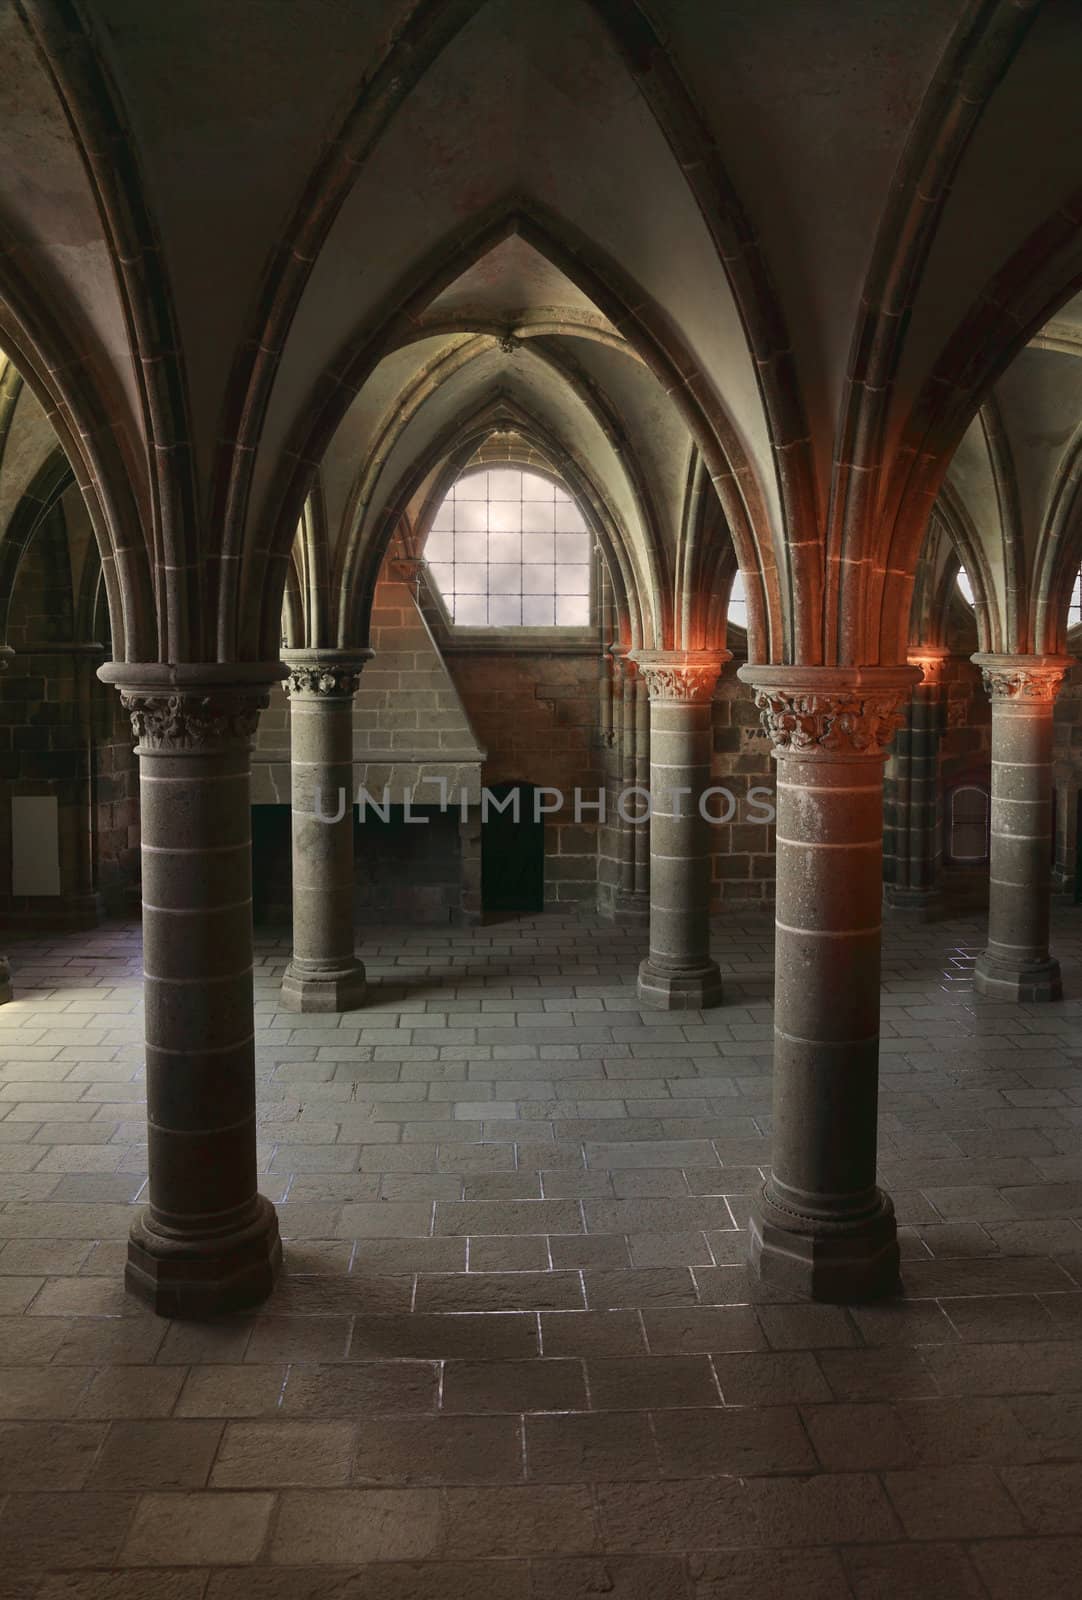 Gothic columns and arches inside the monastry from Mount St Michel,France.